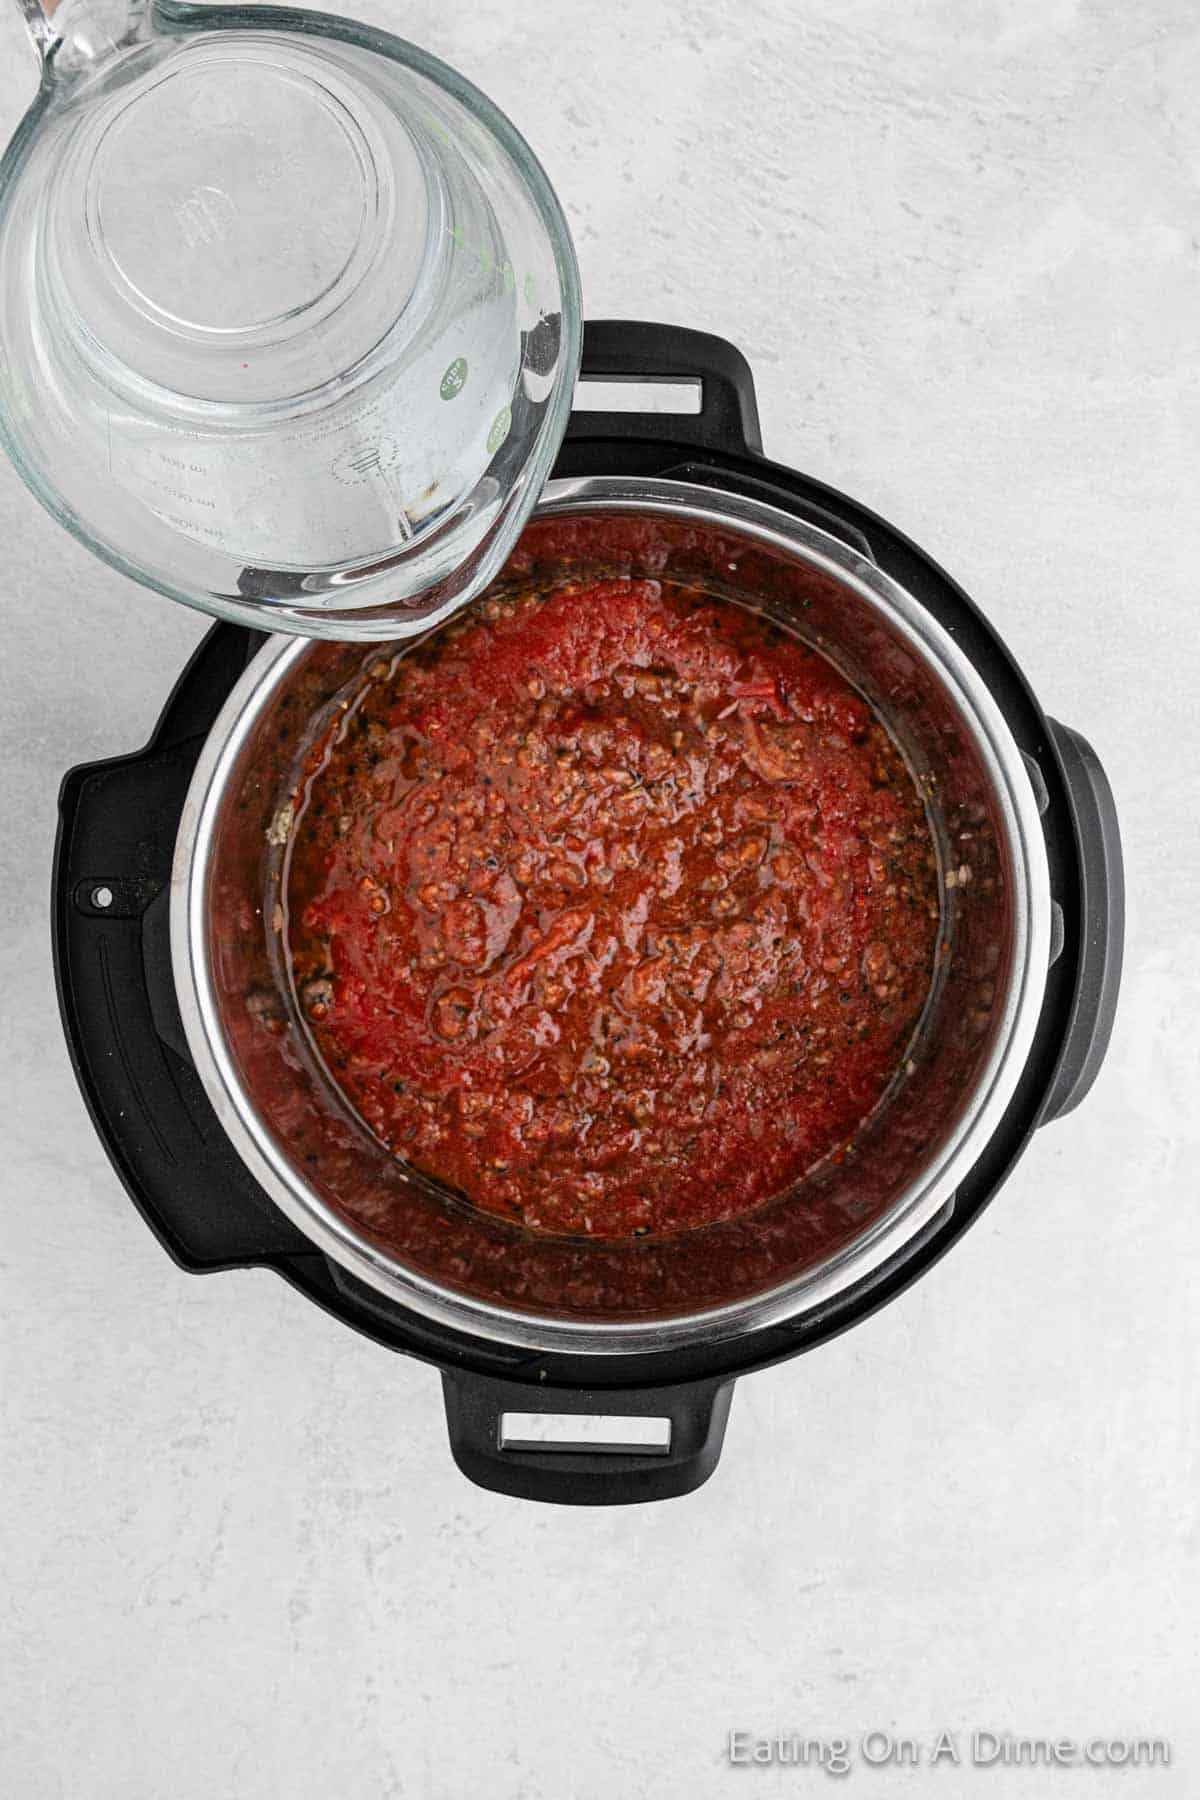 Adding in the sauce with water into the instant pot